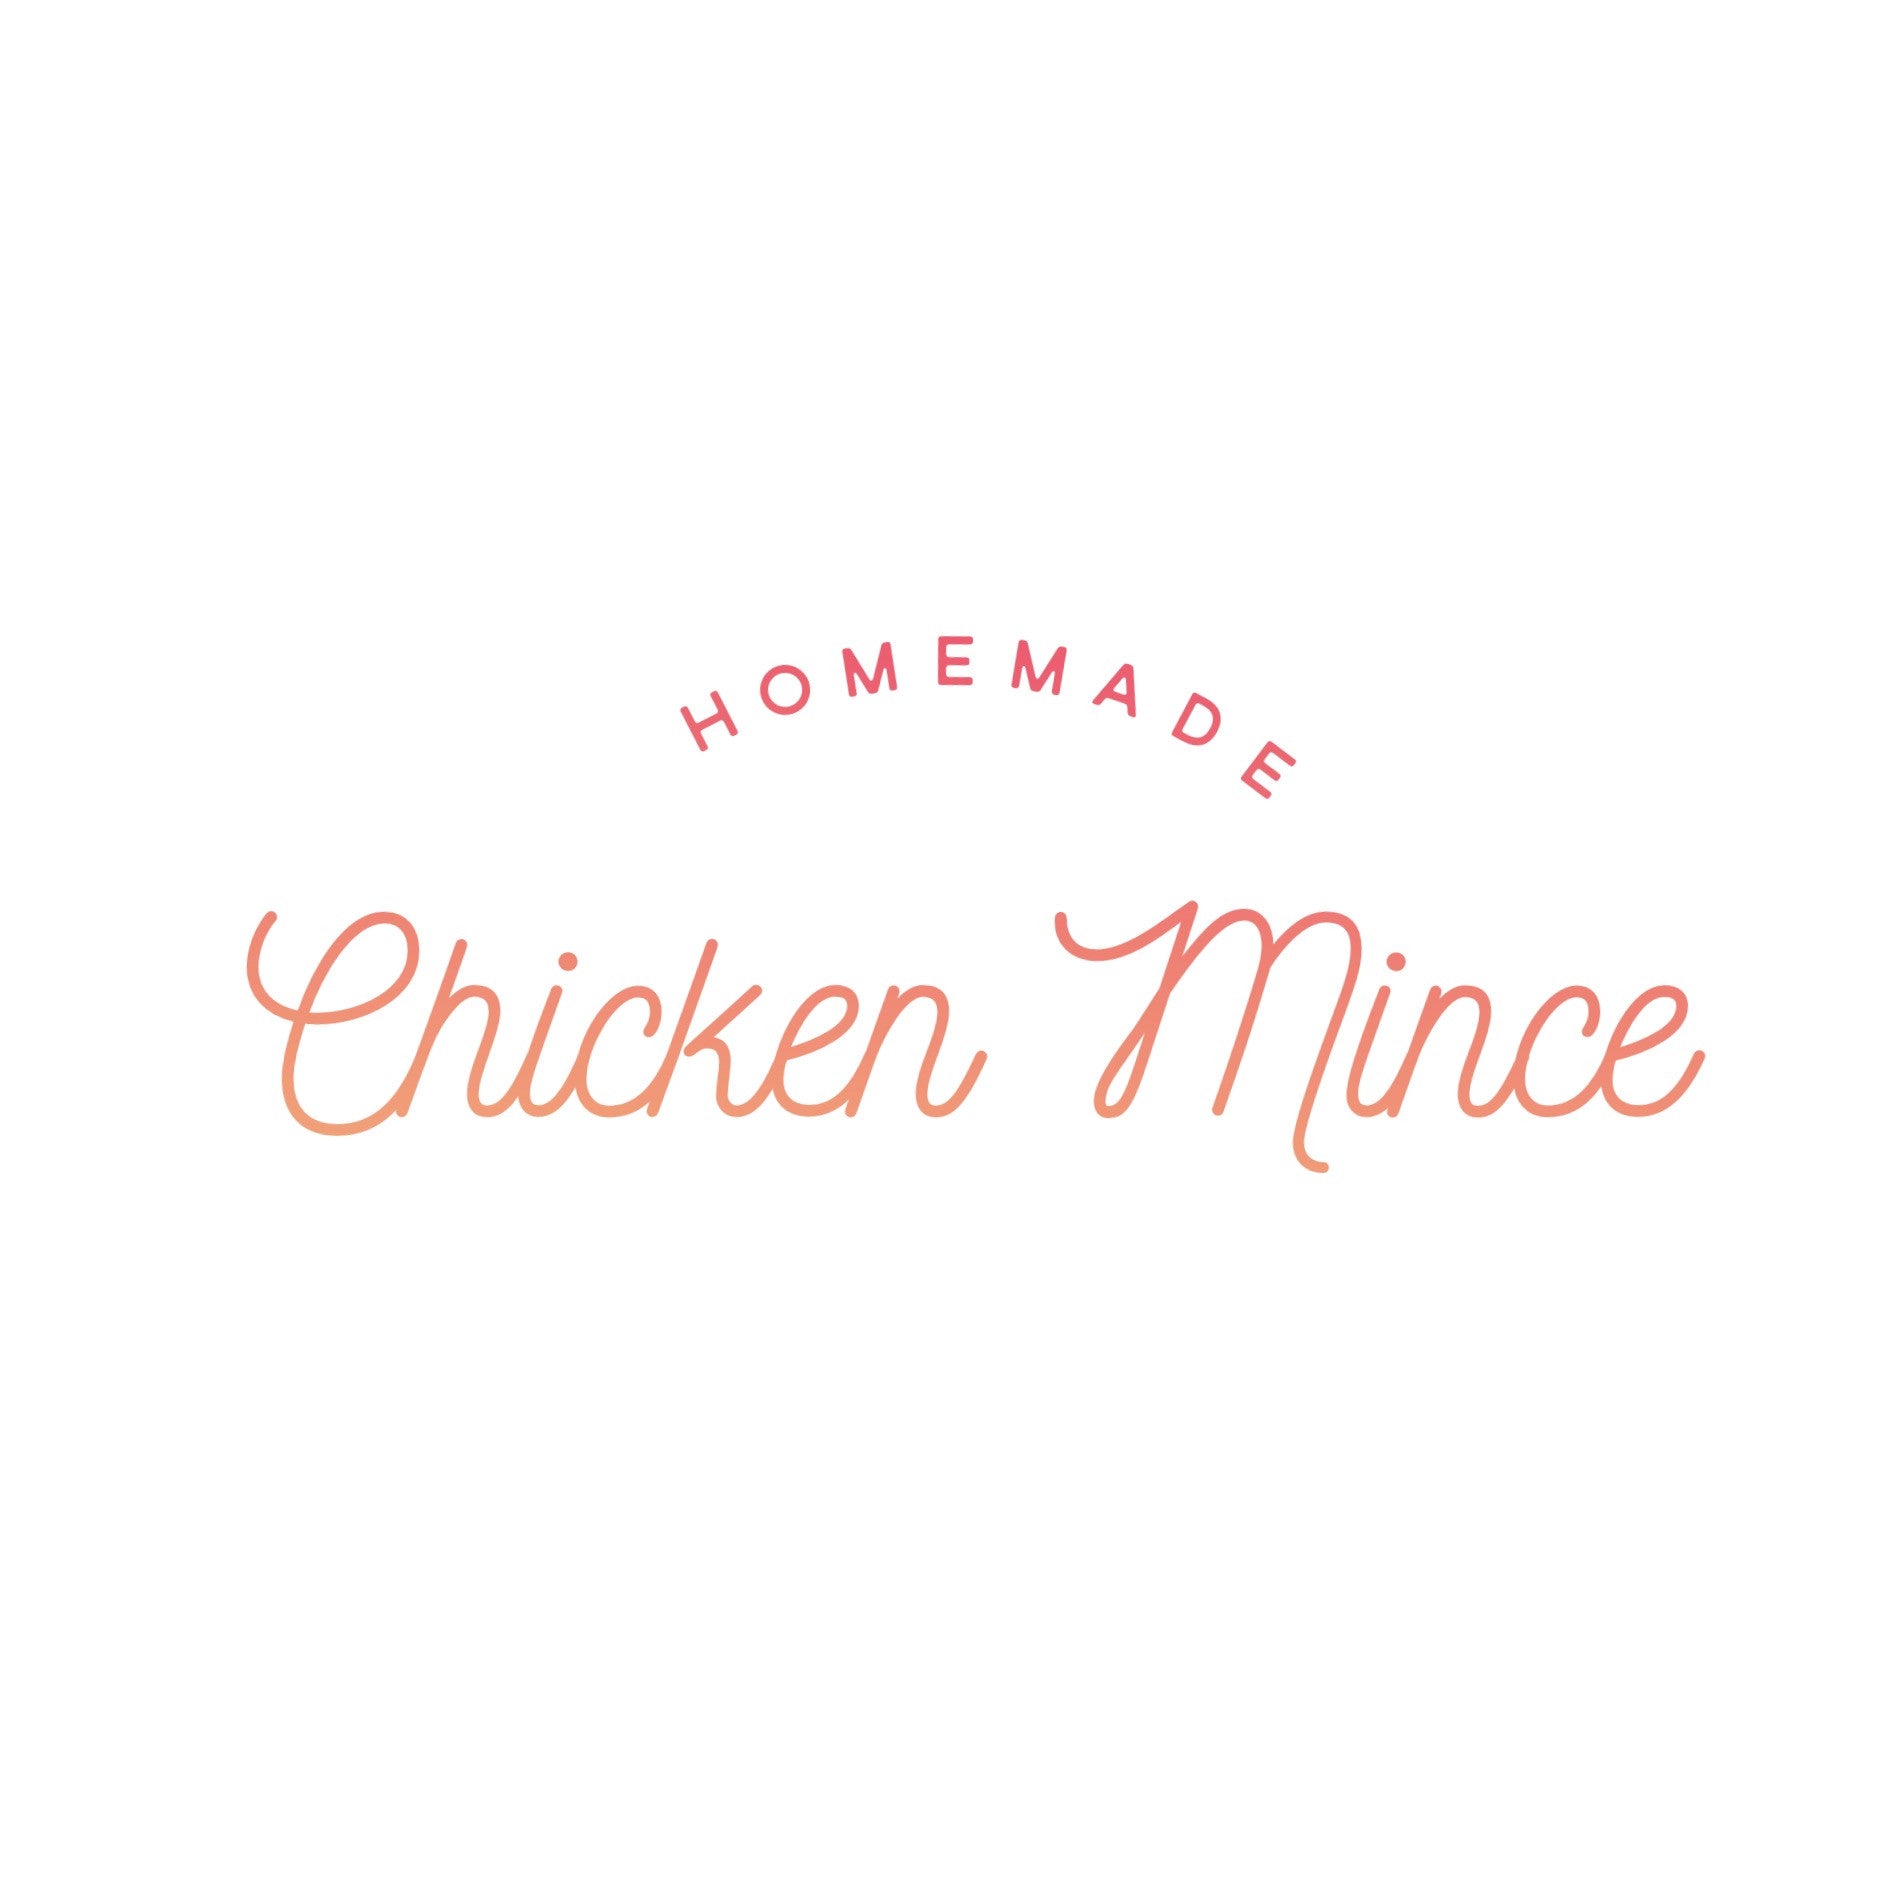 How To: Make your own chicken mince